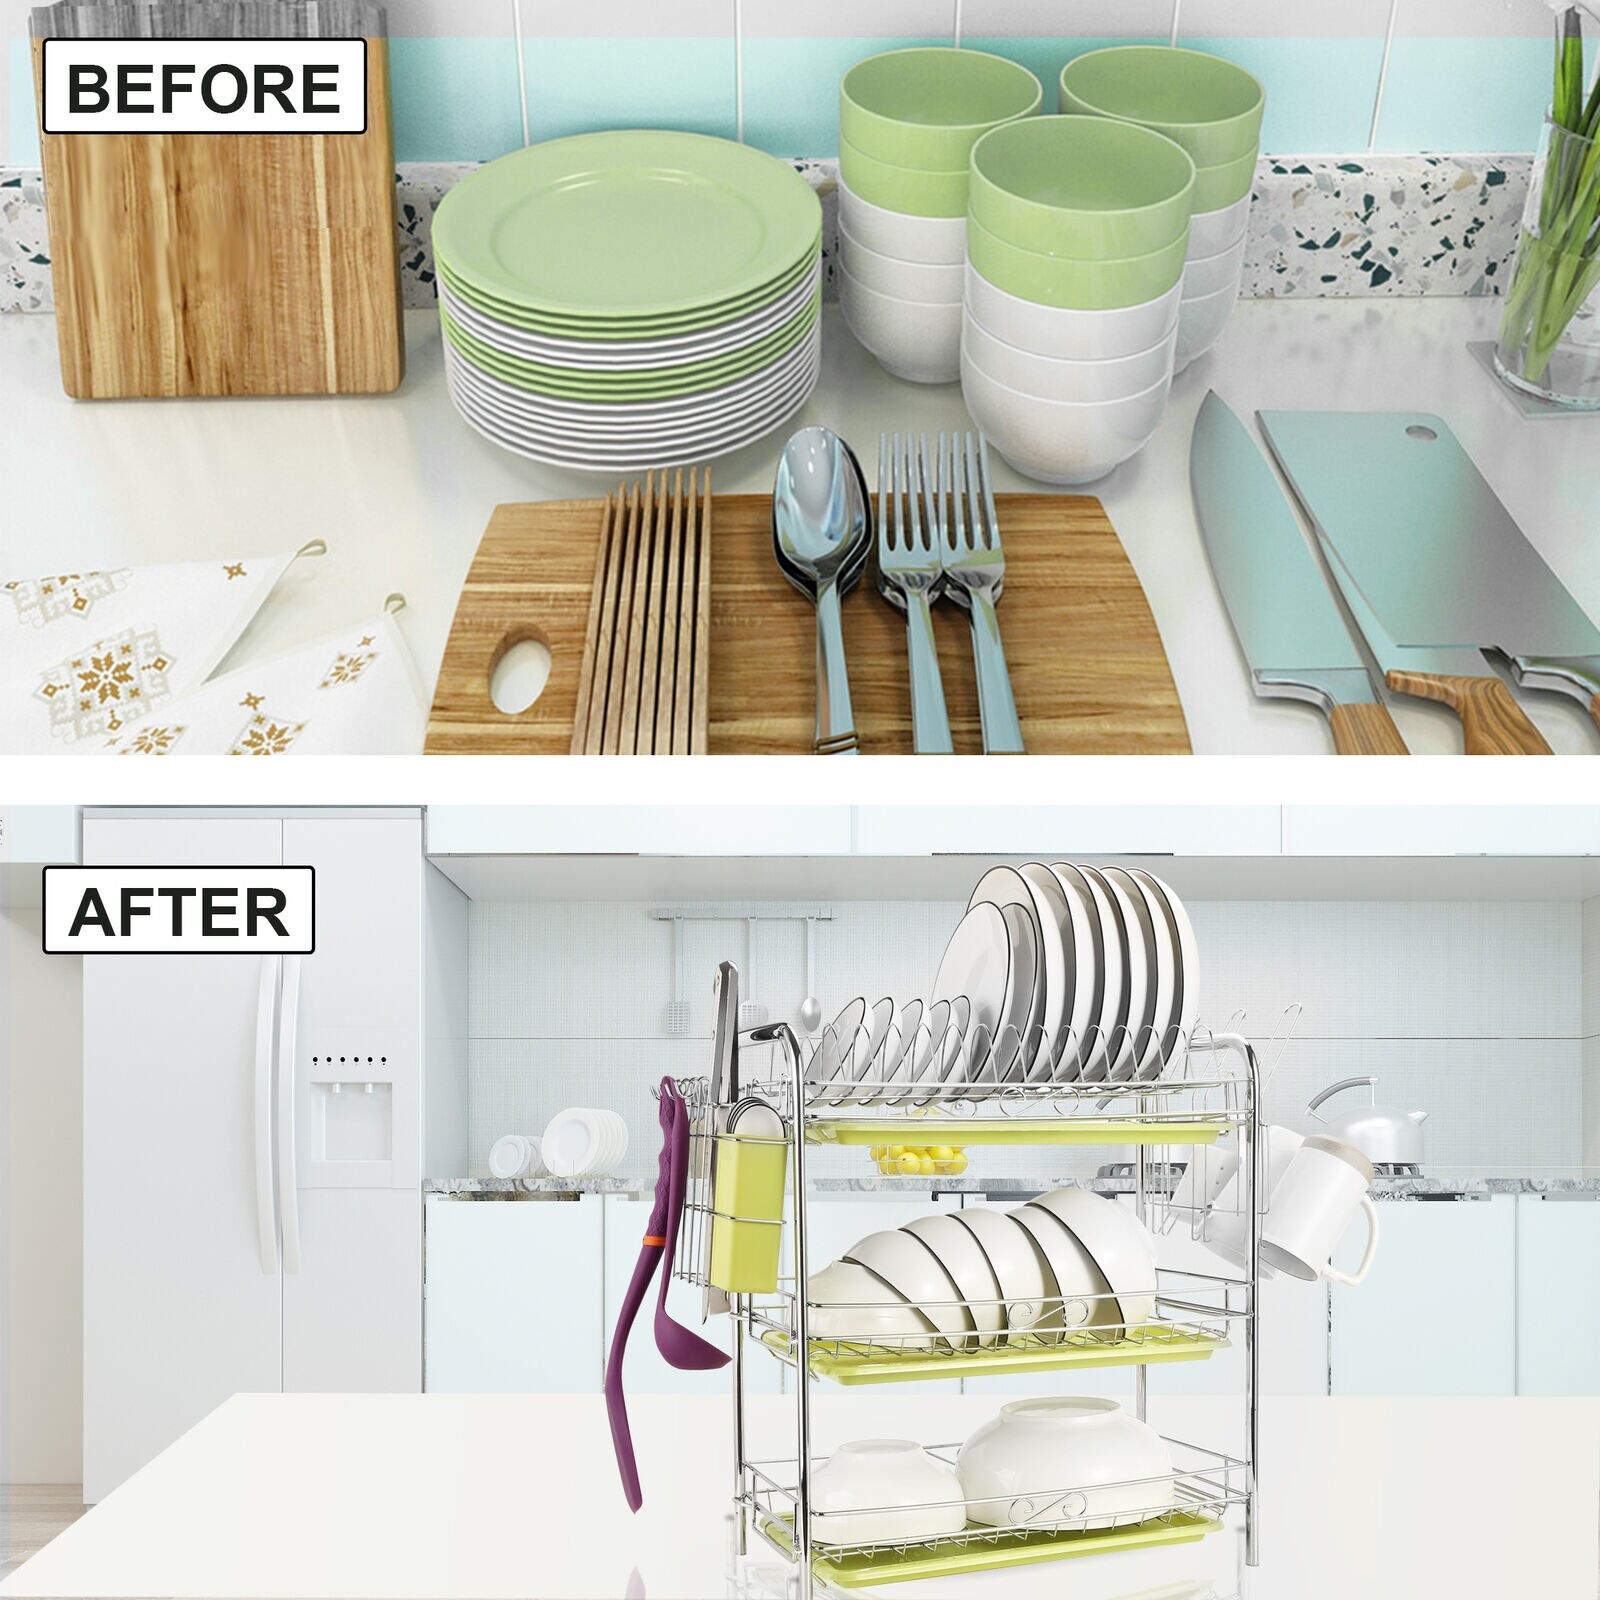 Dish Drying Rack for Compact Dish Drainer with Drainboard, White - On Sale  - Bed Bath & Beyond - 37477749